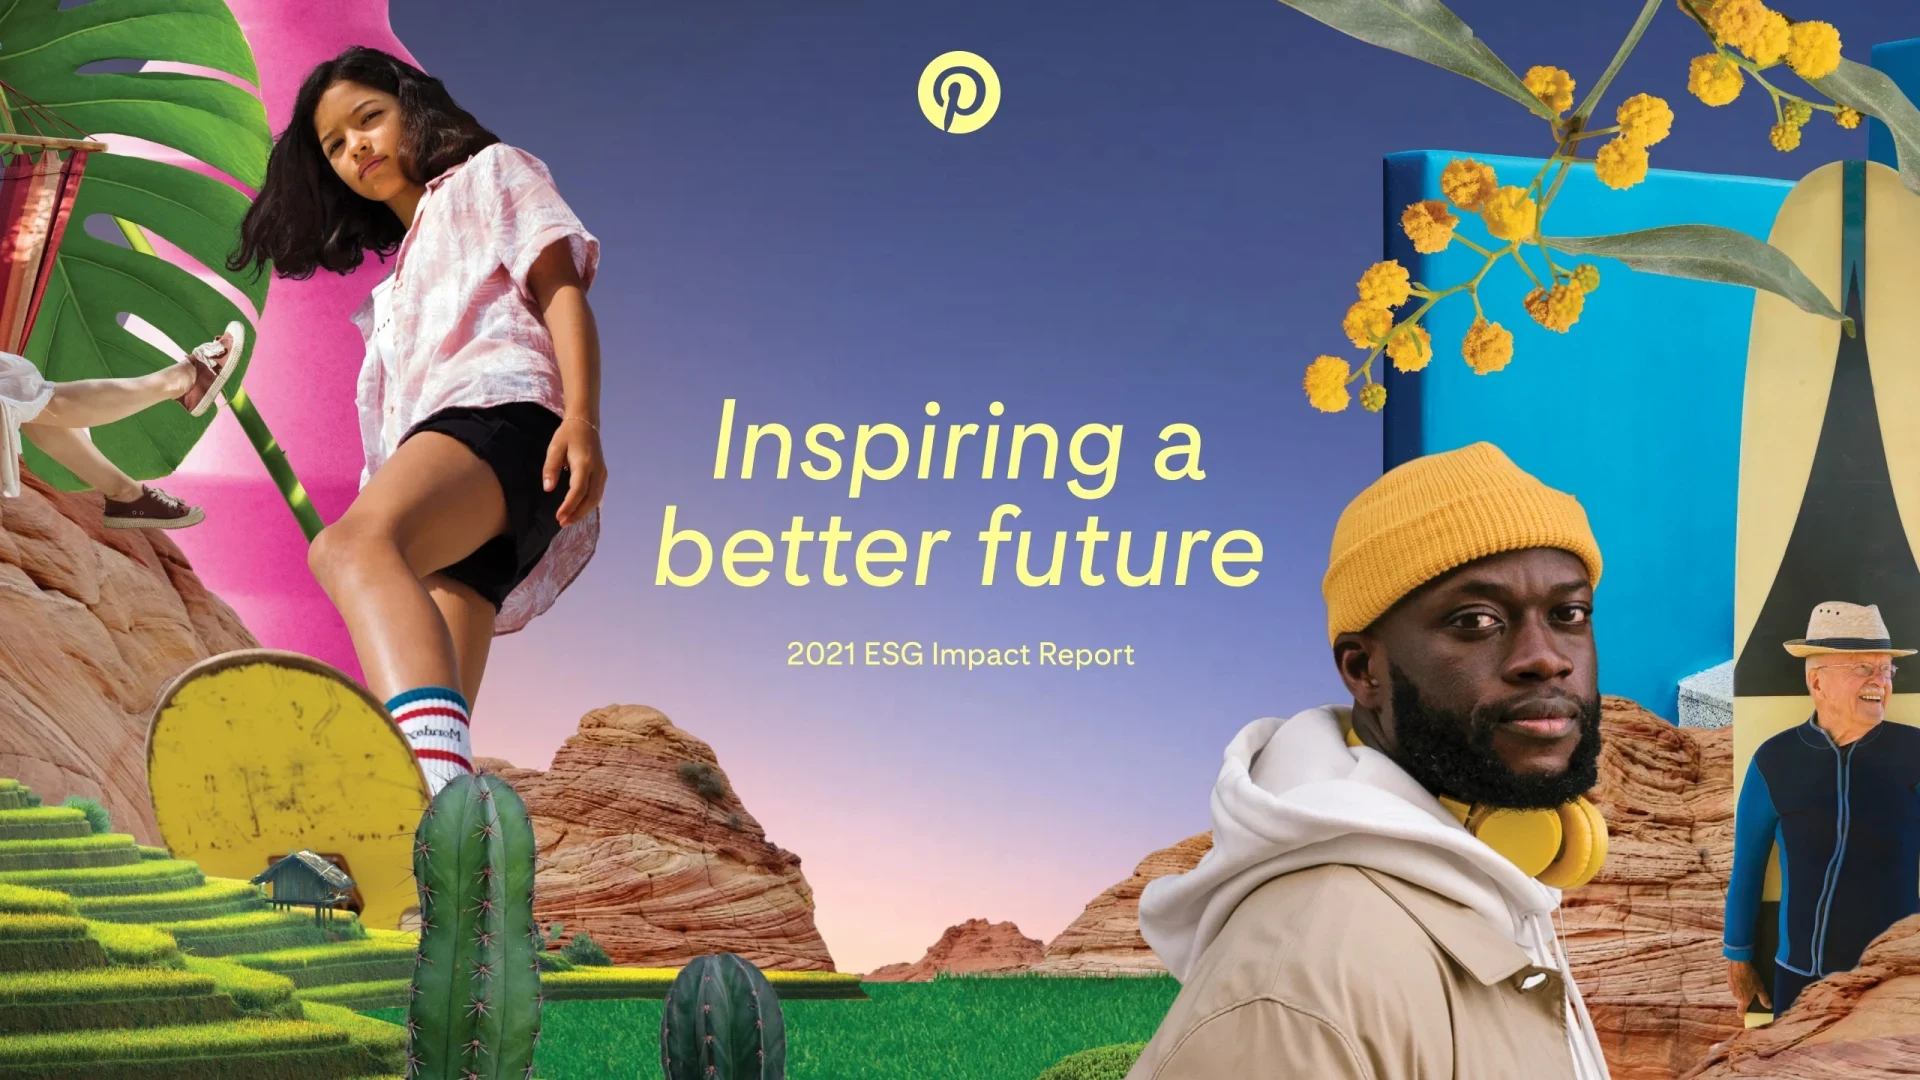 A colourful collage of Pinterest-inspired images surrounds the words ‘Inspiring a better future’